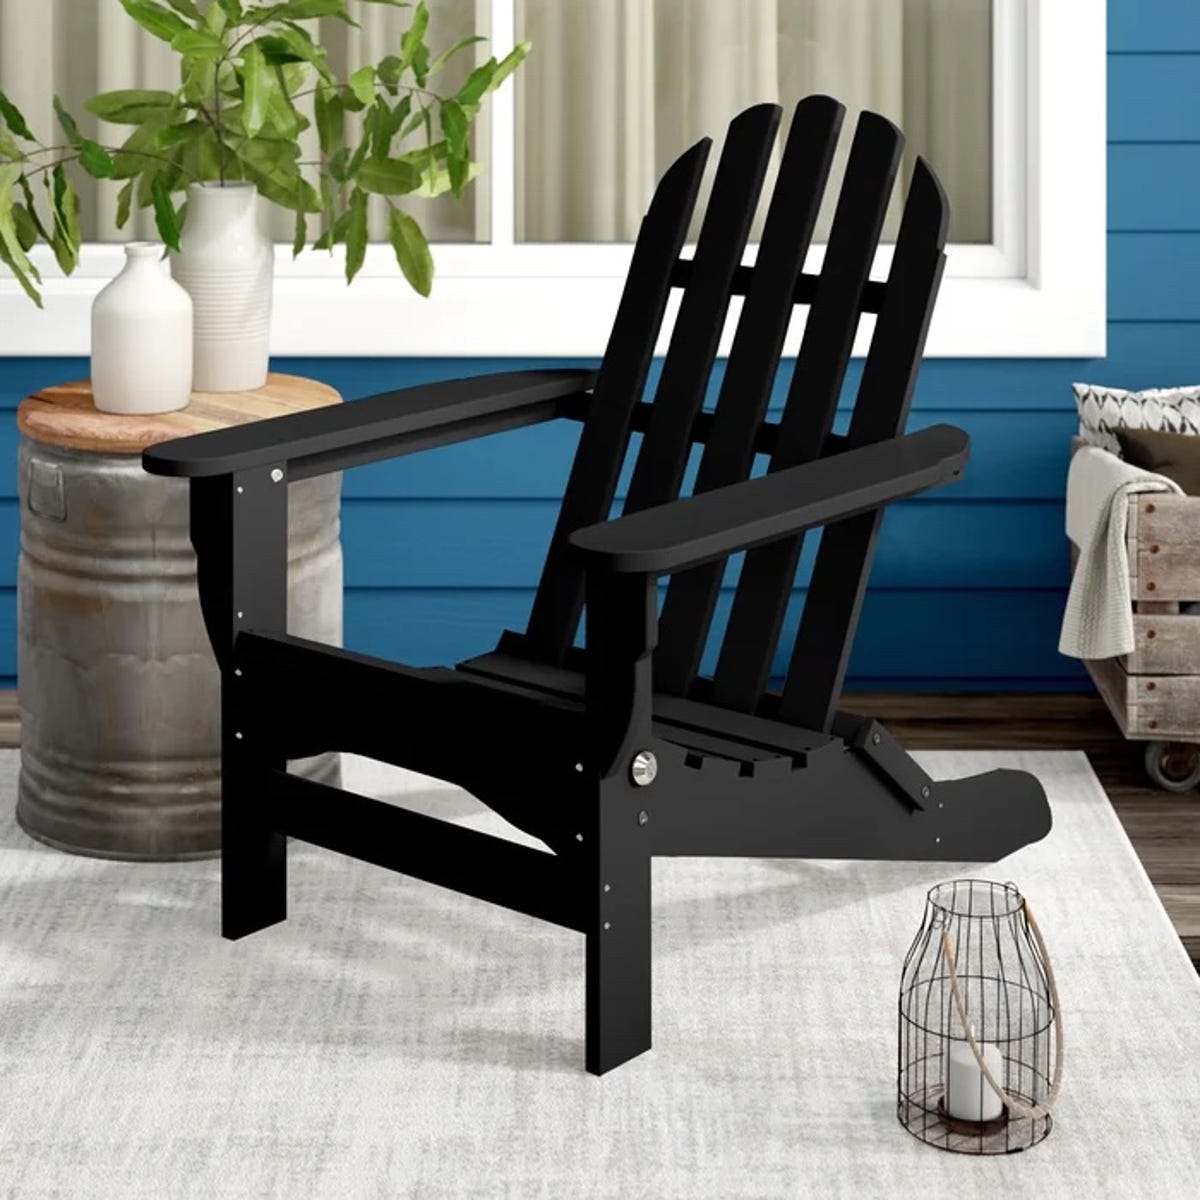 Black Adirondack chair on a porch with other outdoor decor